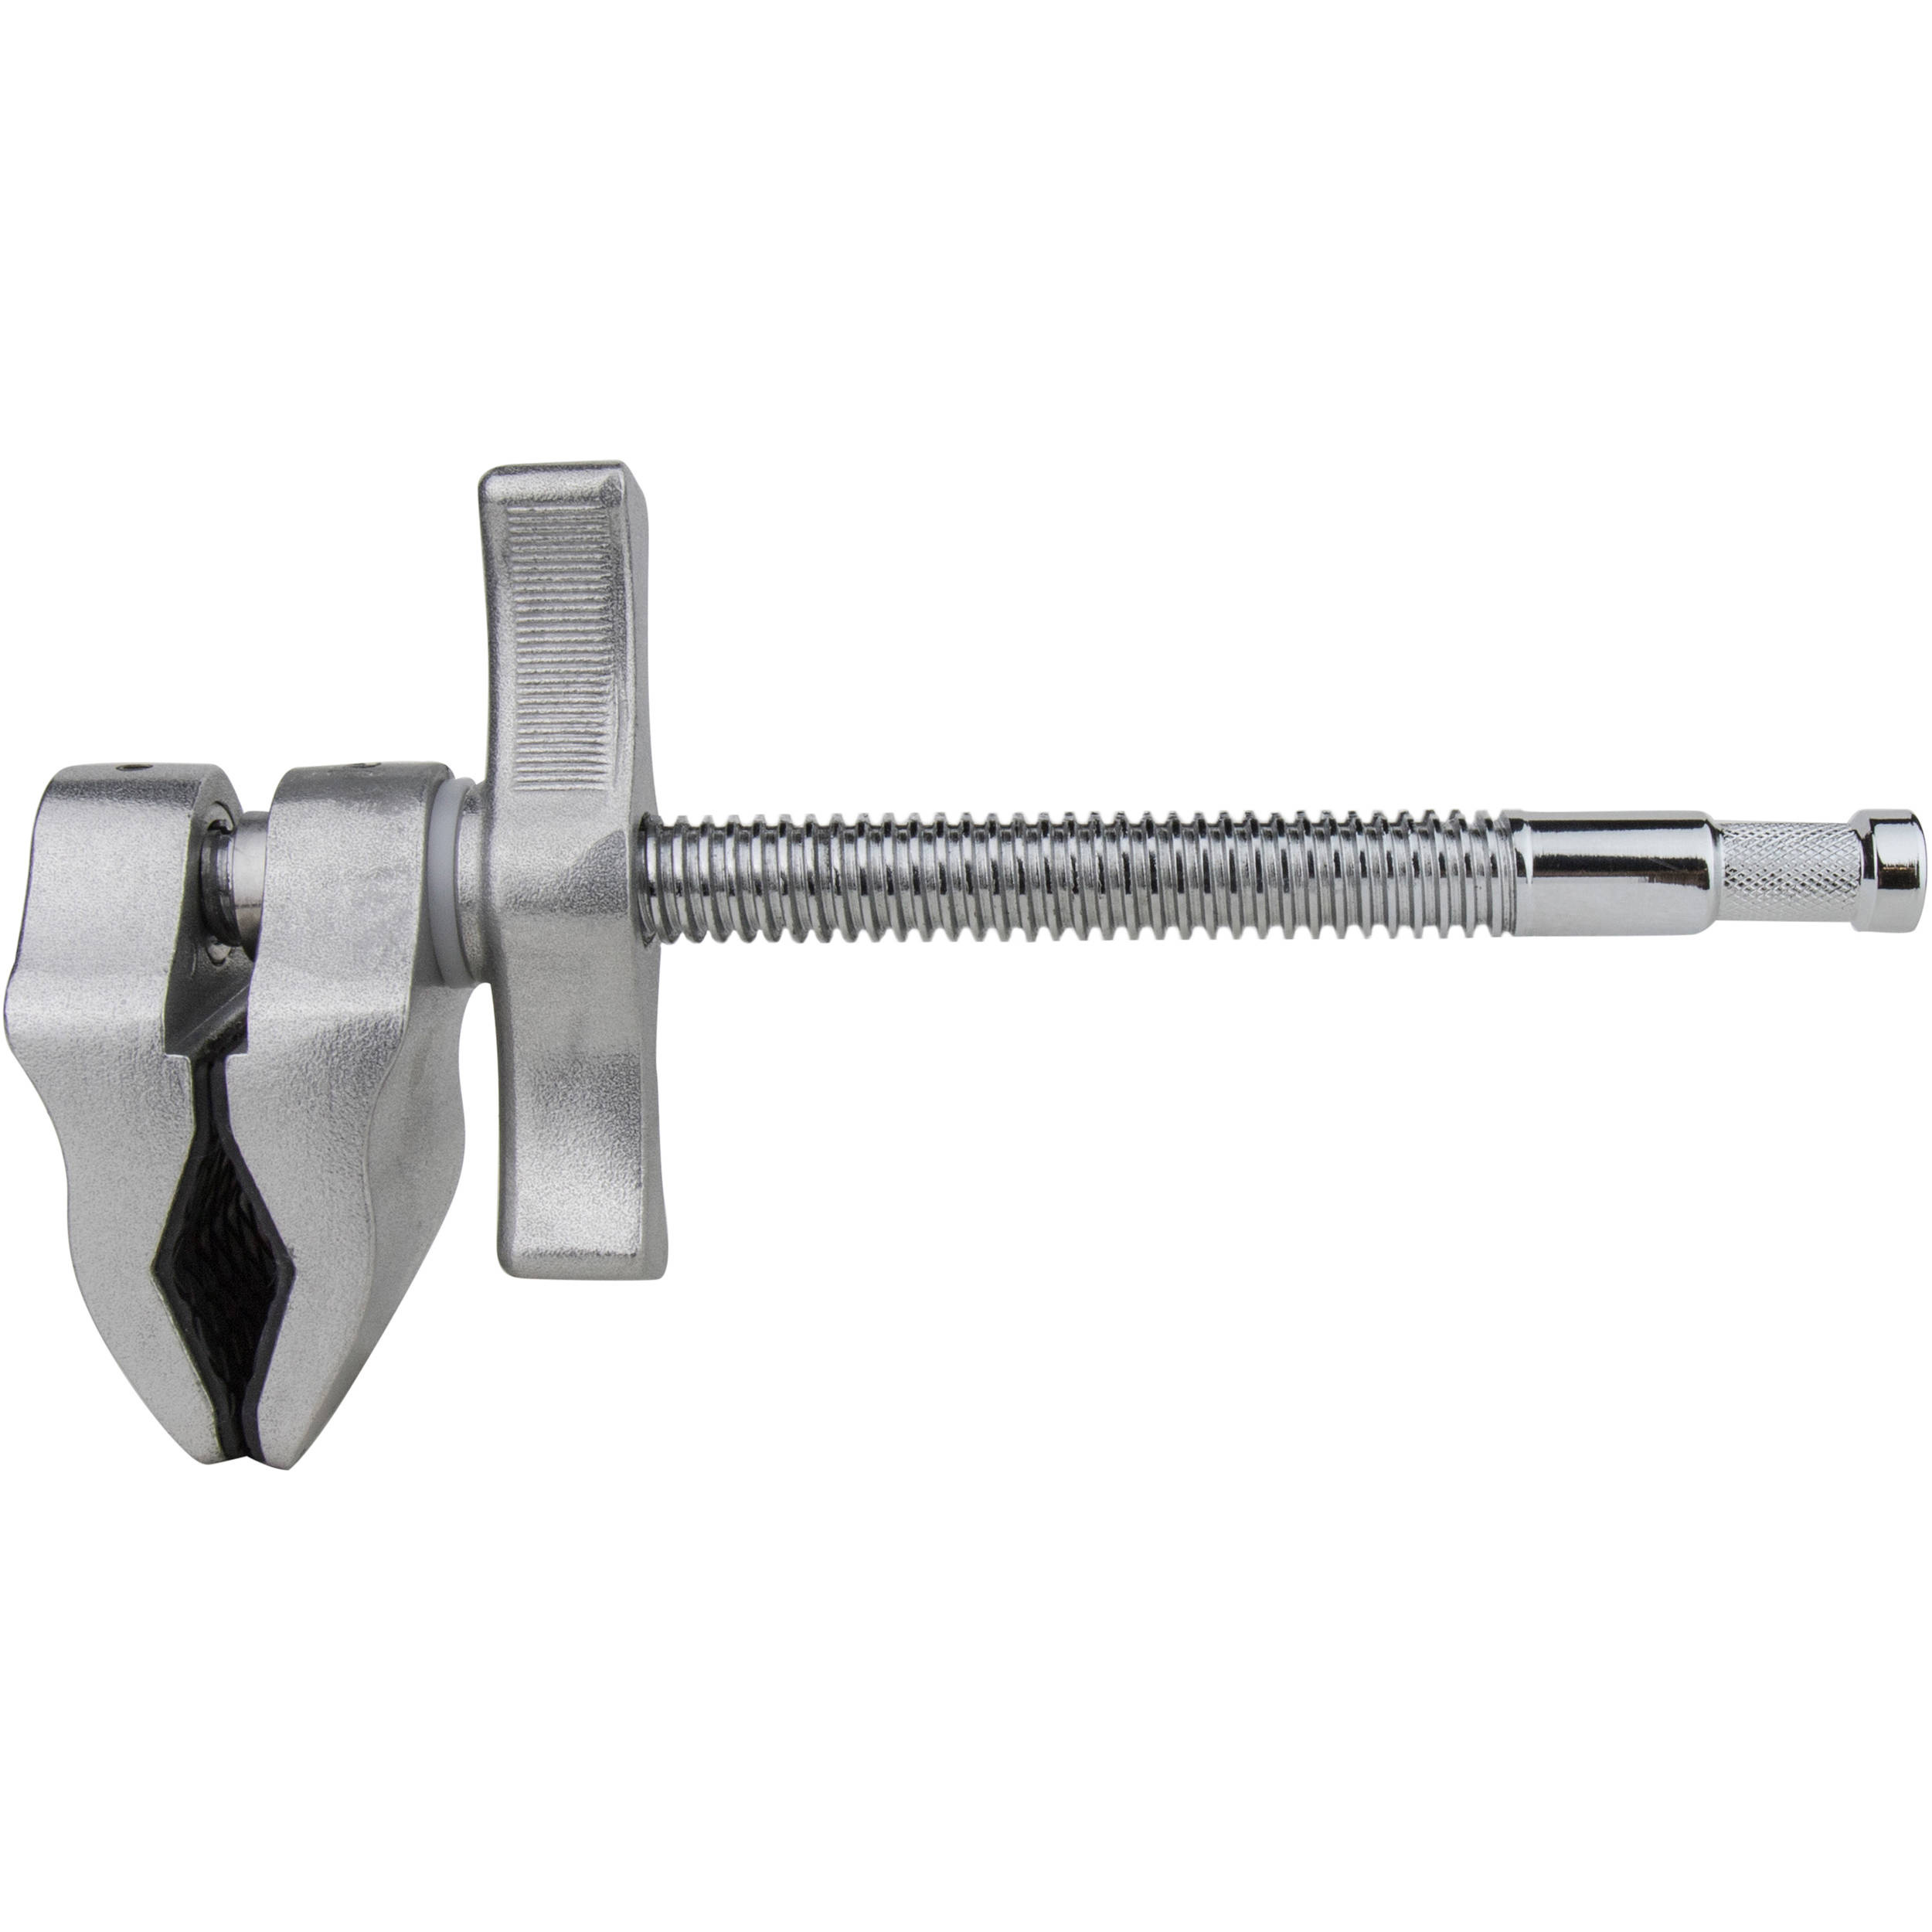 Kupo KCP-604 4" Super Viser Clamp for up to 2" Surfaces